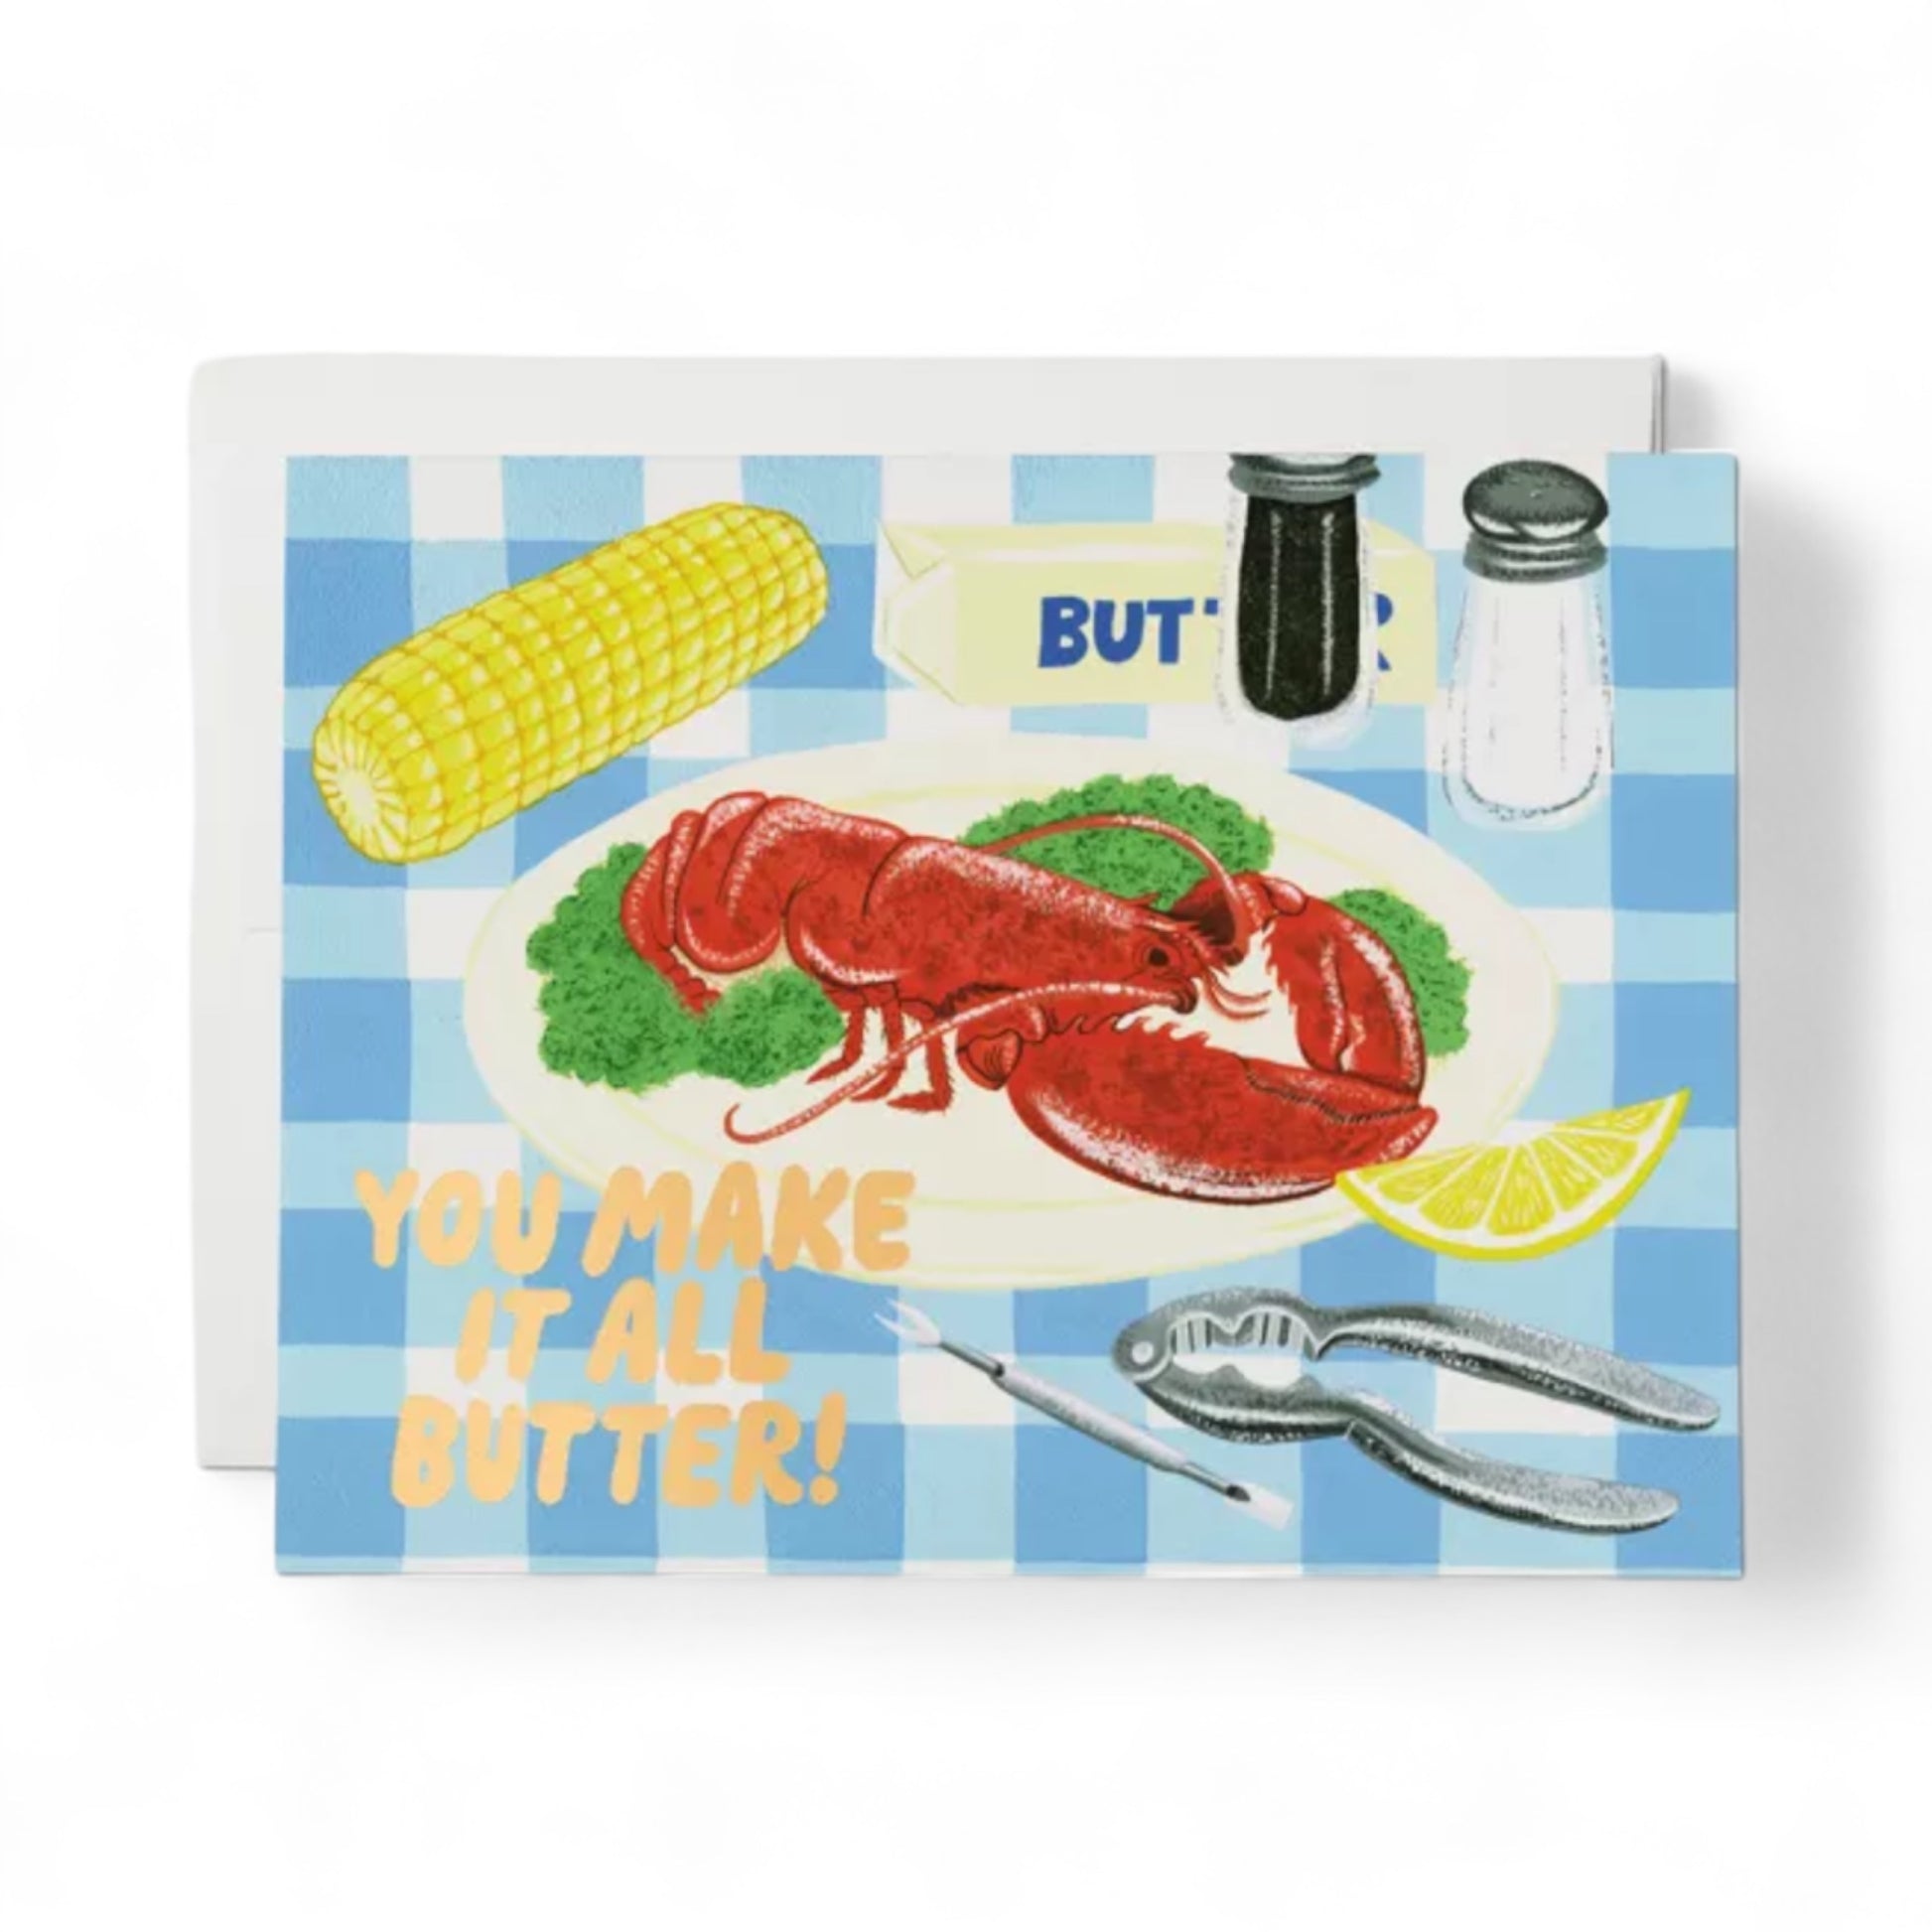 You Make it All Butter - Greeting Card - Hella Kitsch